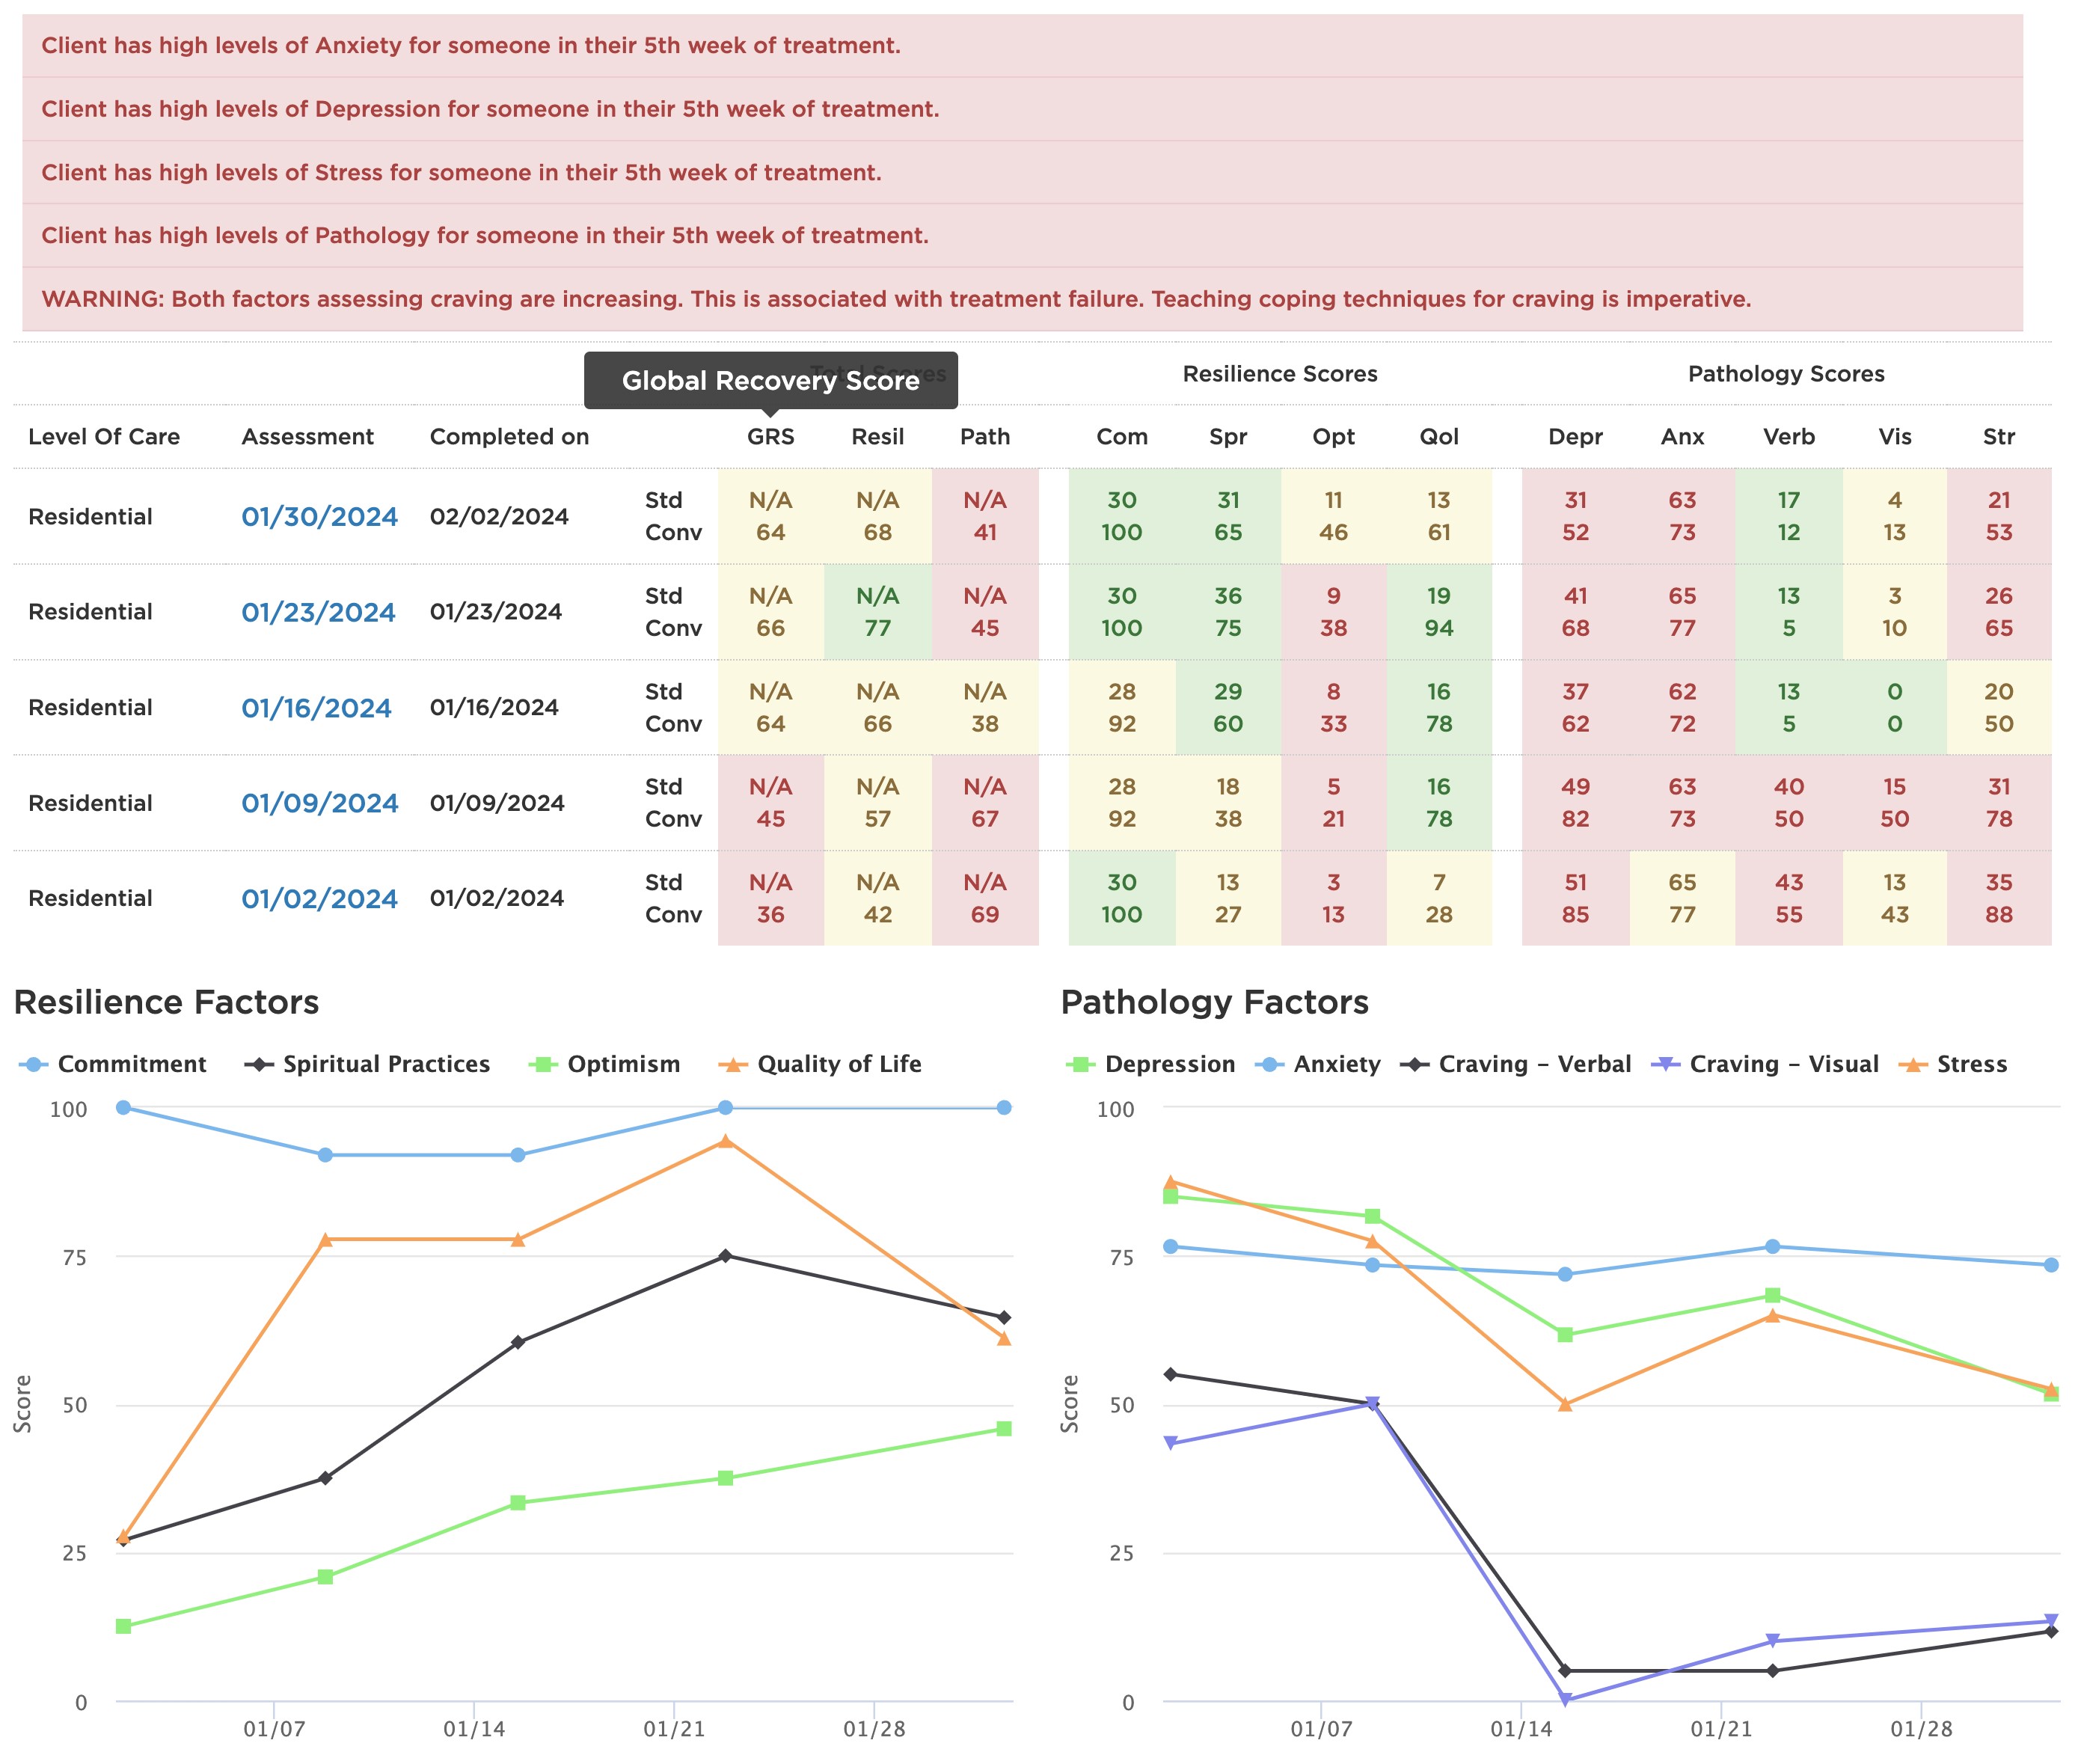 Clinical Monitoring: Monitors client symptoms in real-time with automatic scoring and graphing. Alerts based on norms of client progress through treatment.  Clinical treatment suggestions based on inter-factor correlations. 